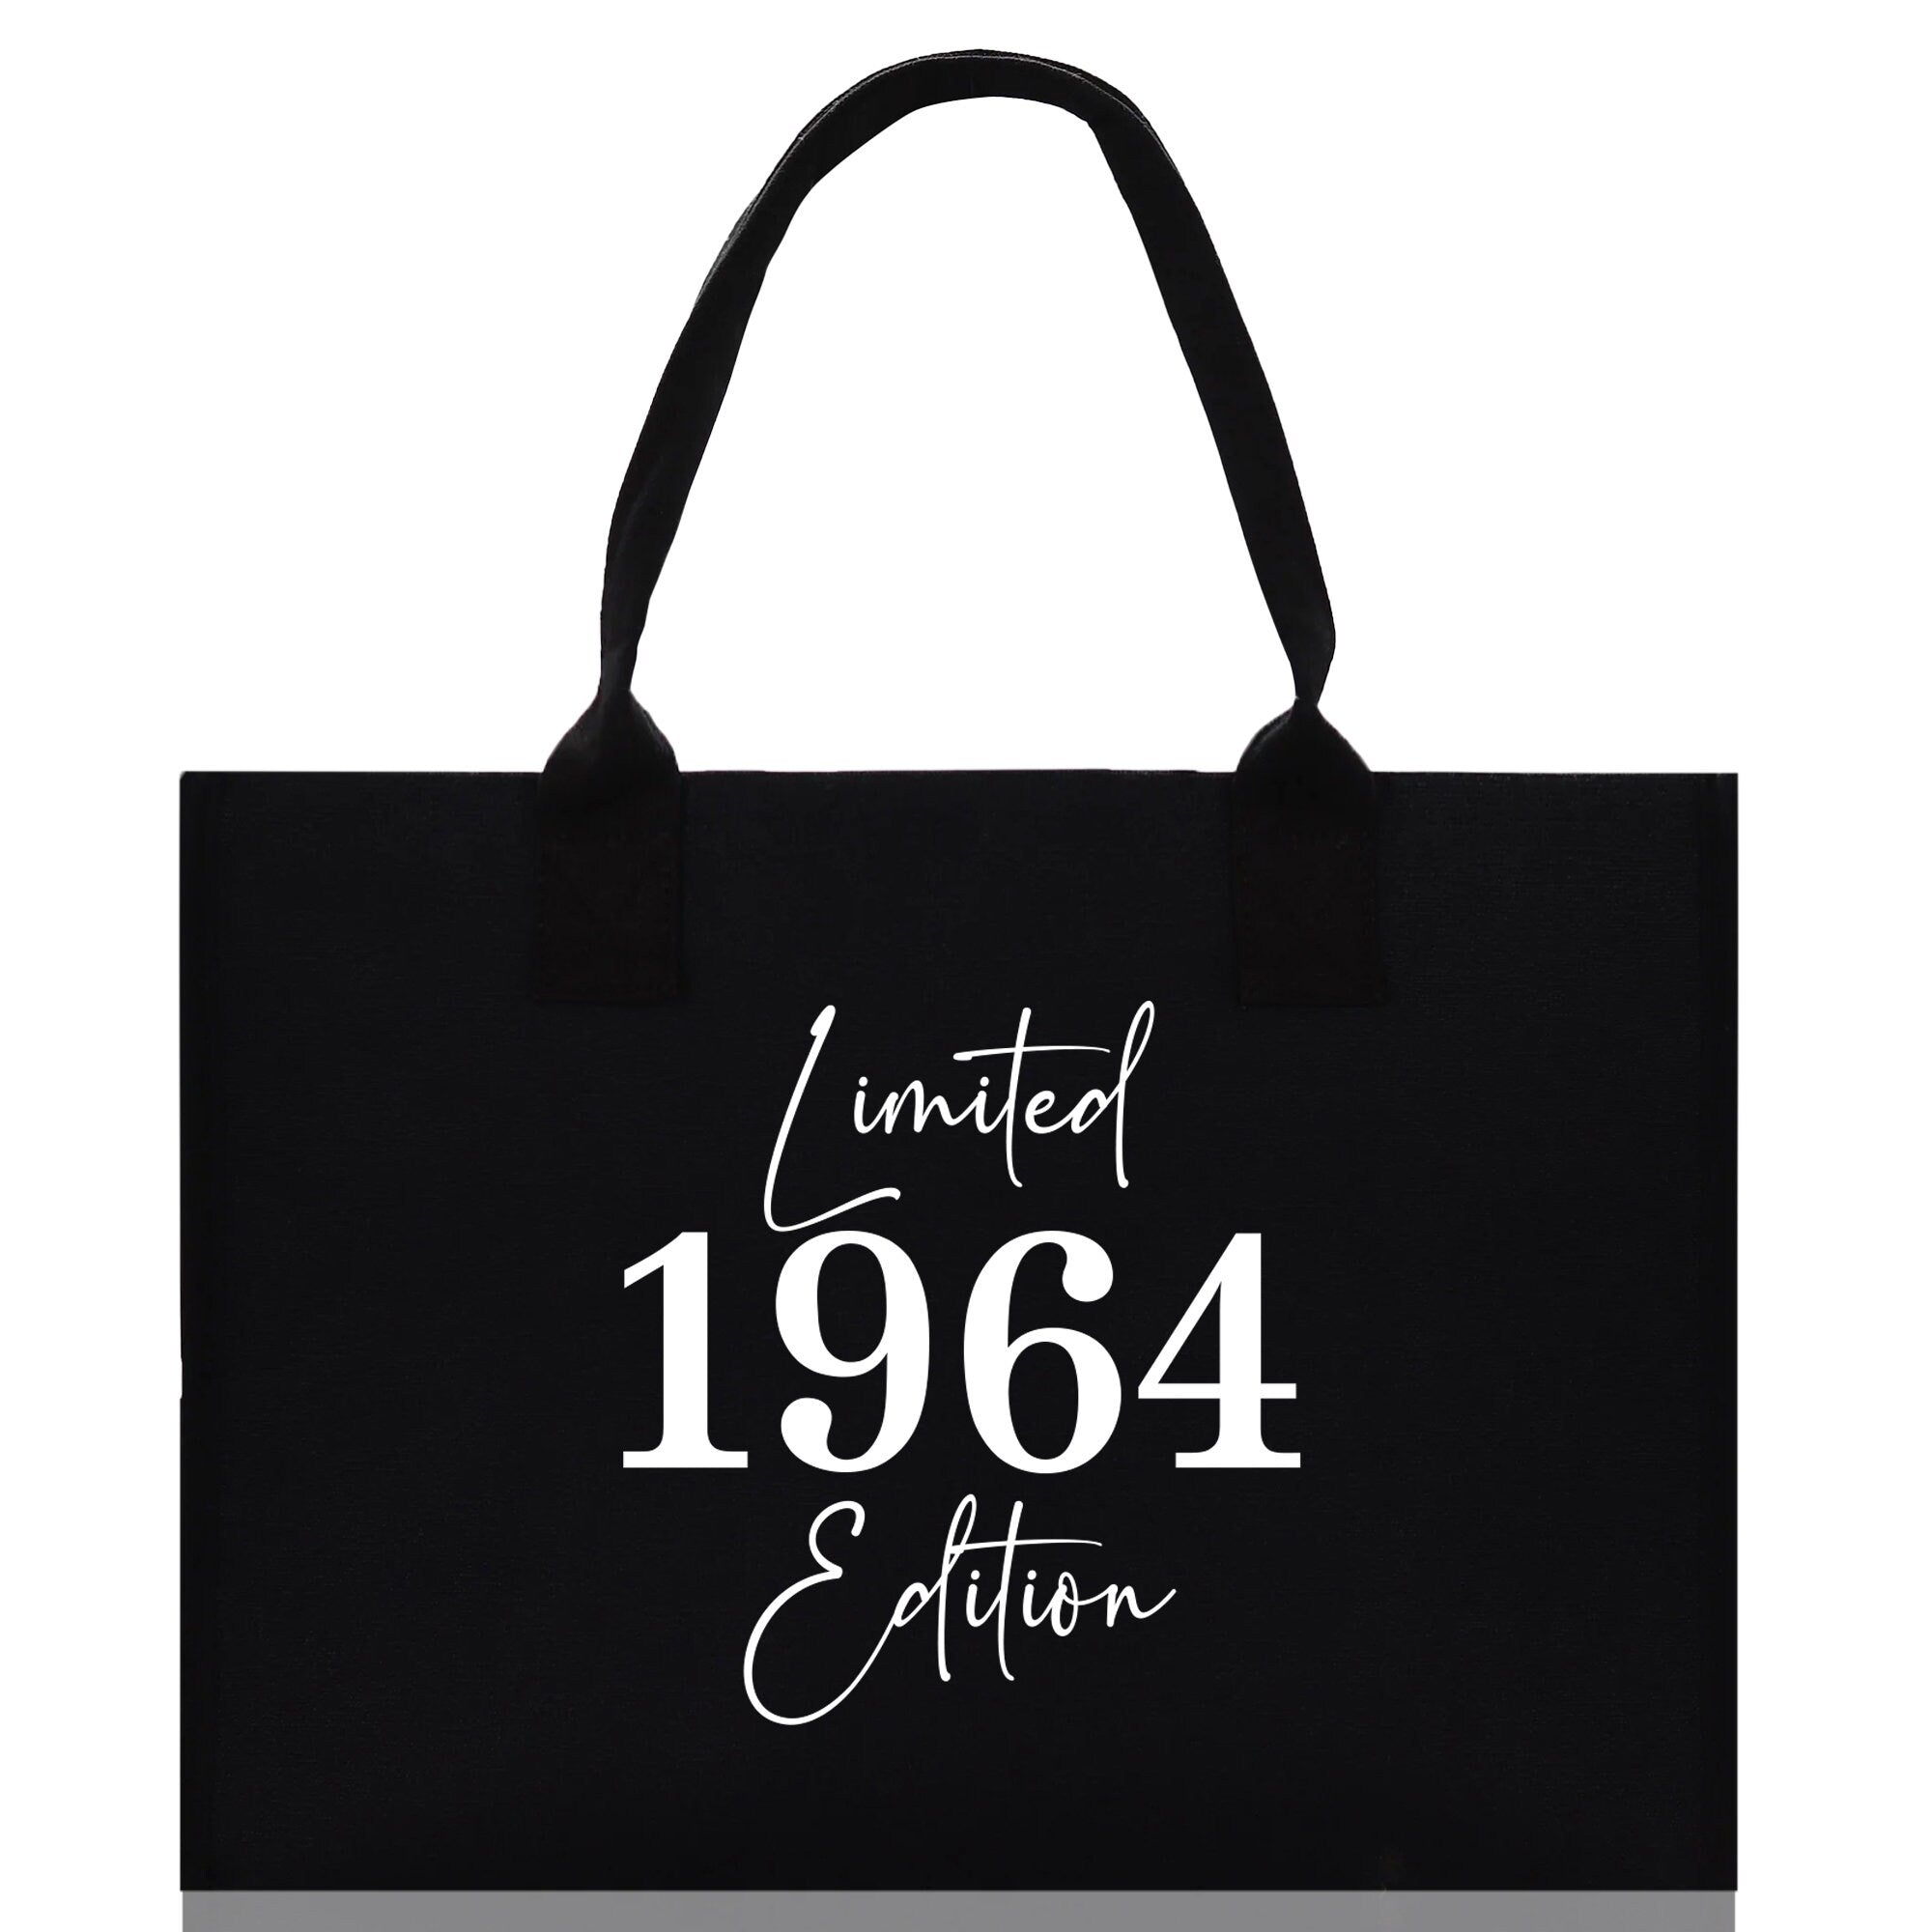 a black tote bag with the words limited, limited and limited written on it